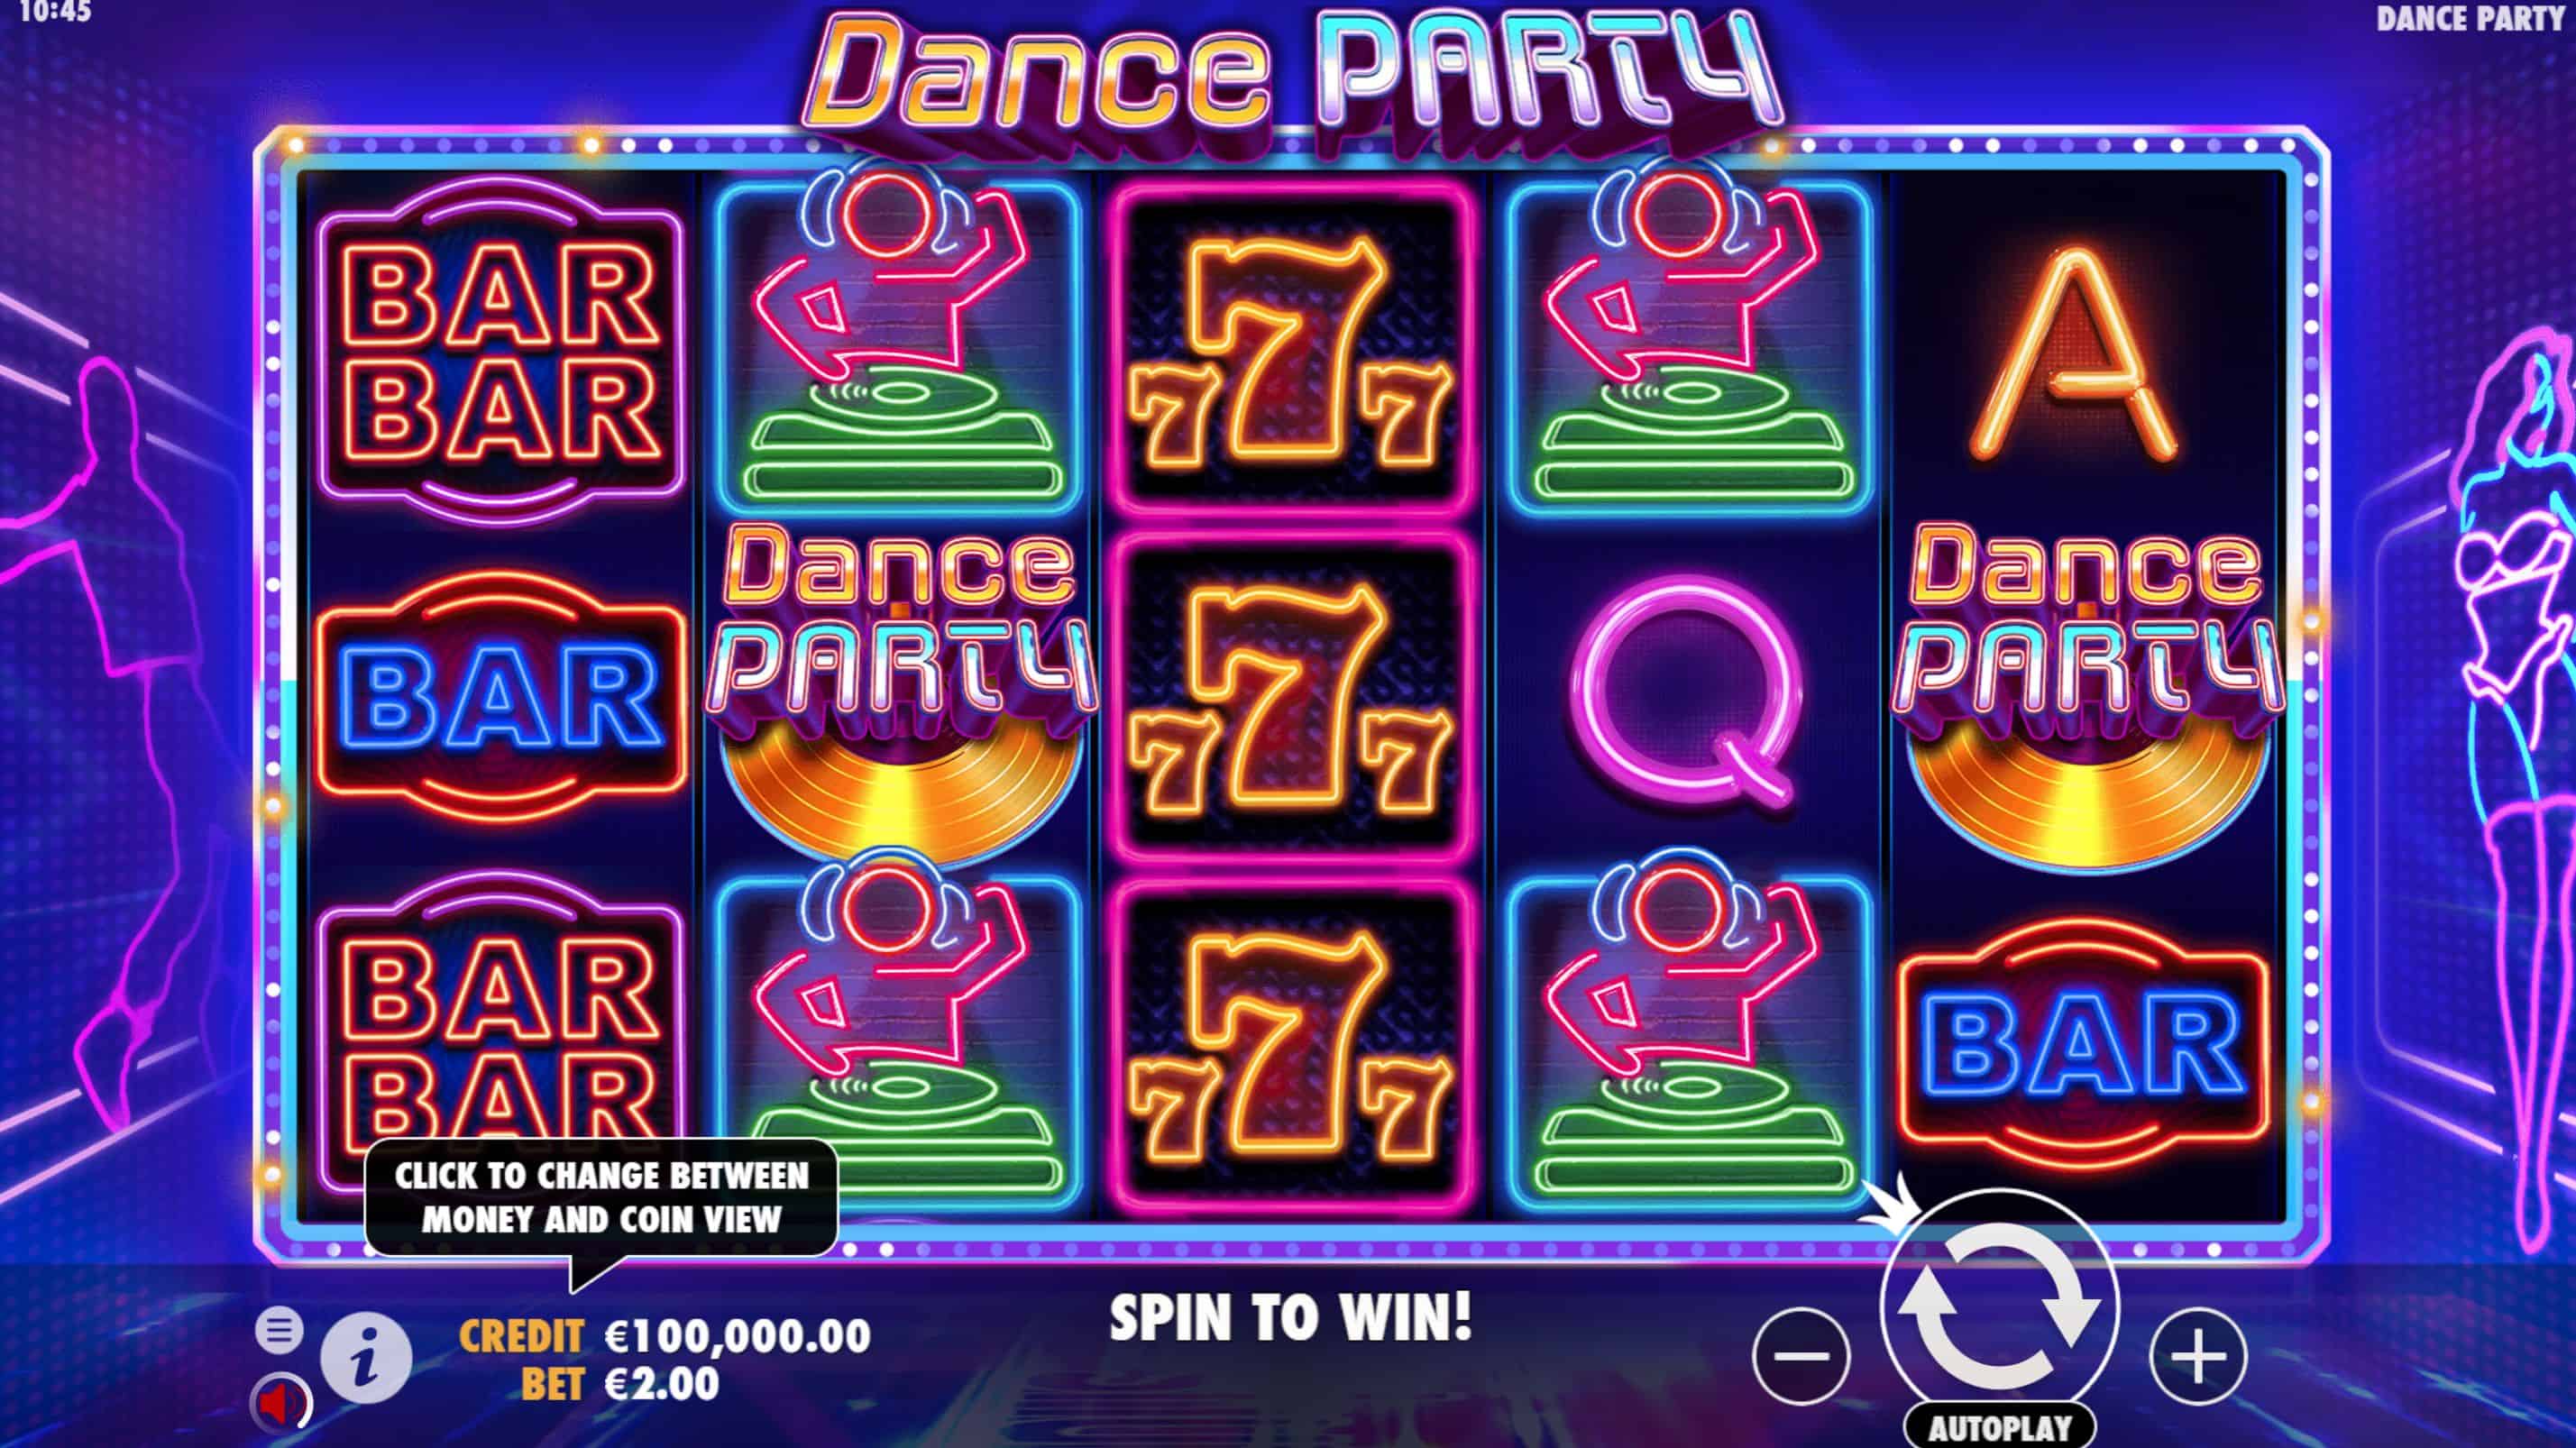 Dance Party Slot Game Free Play at Casino Ireland 01